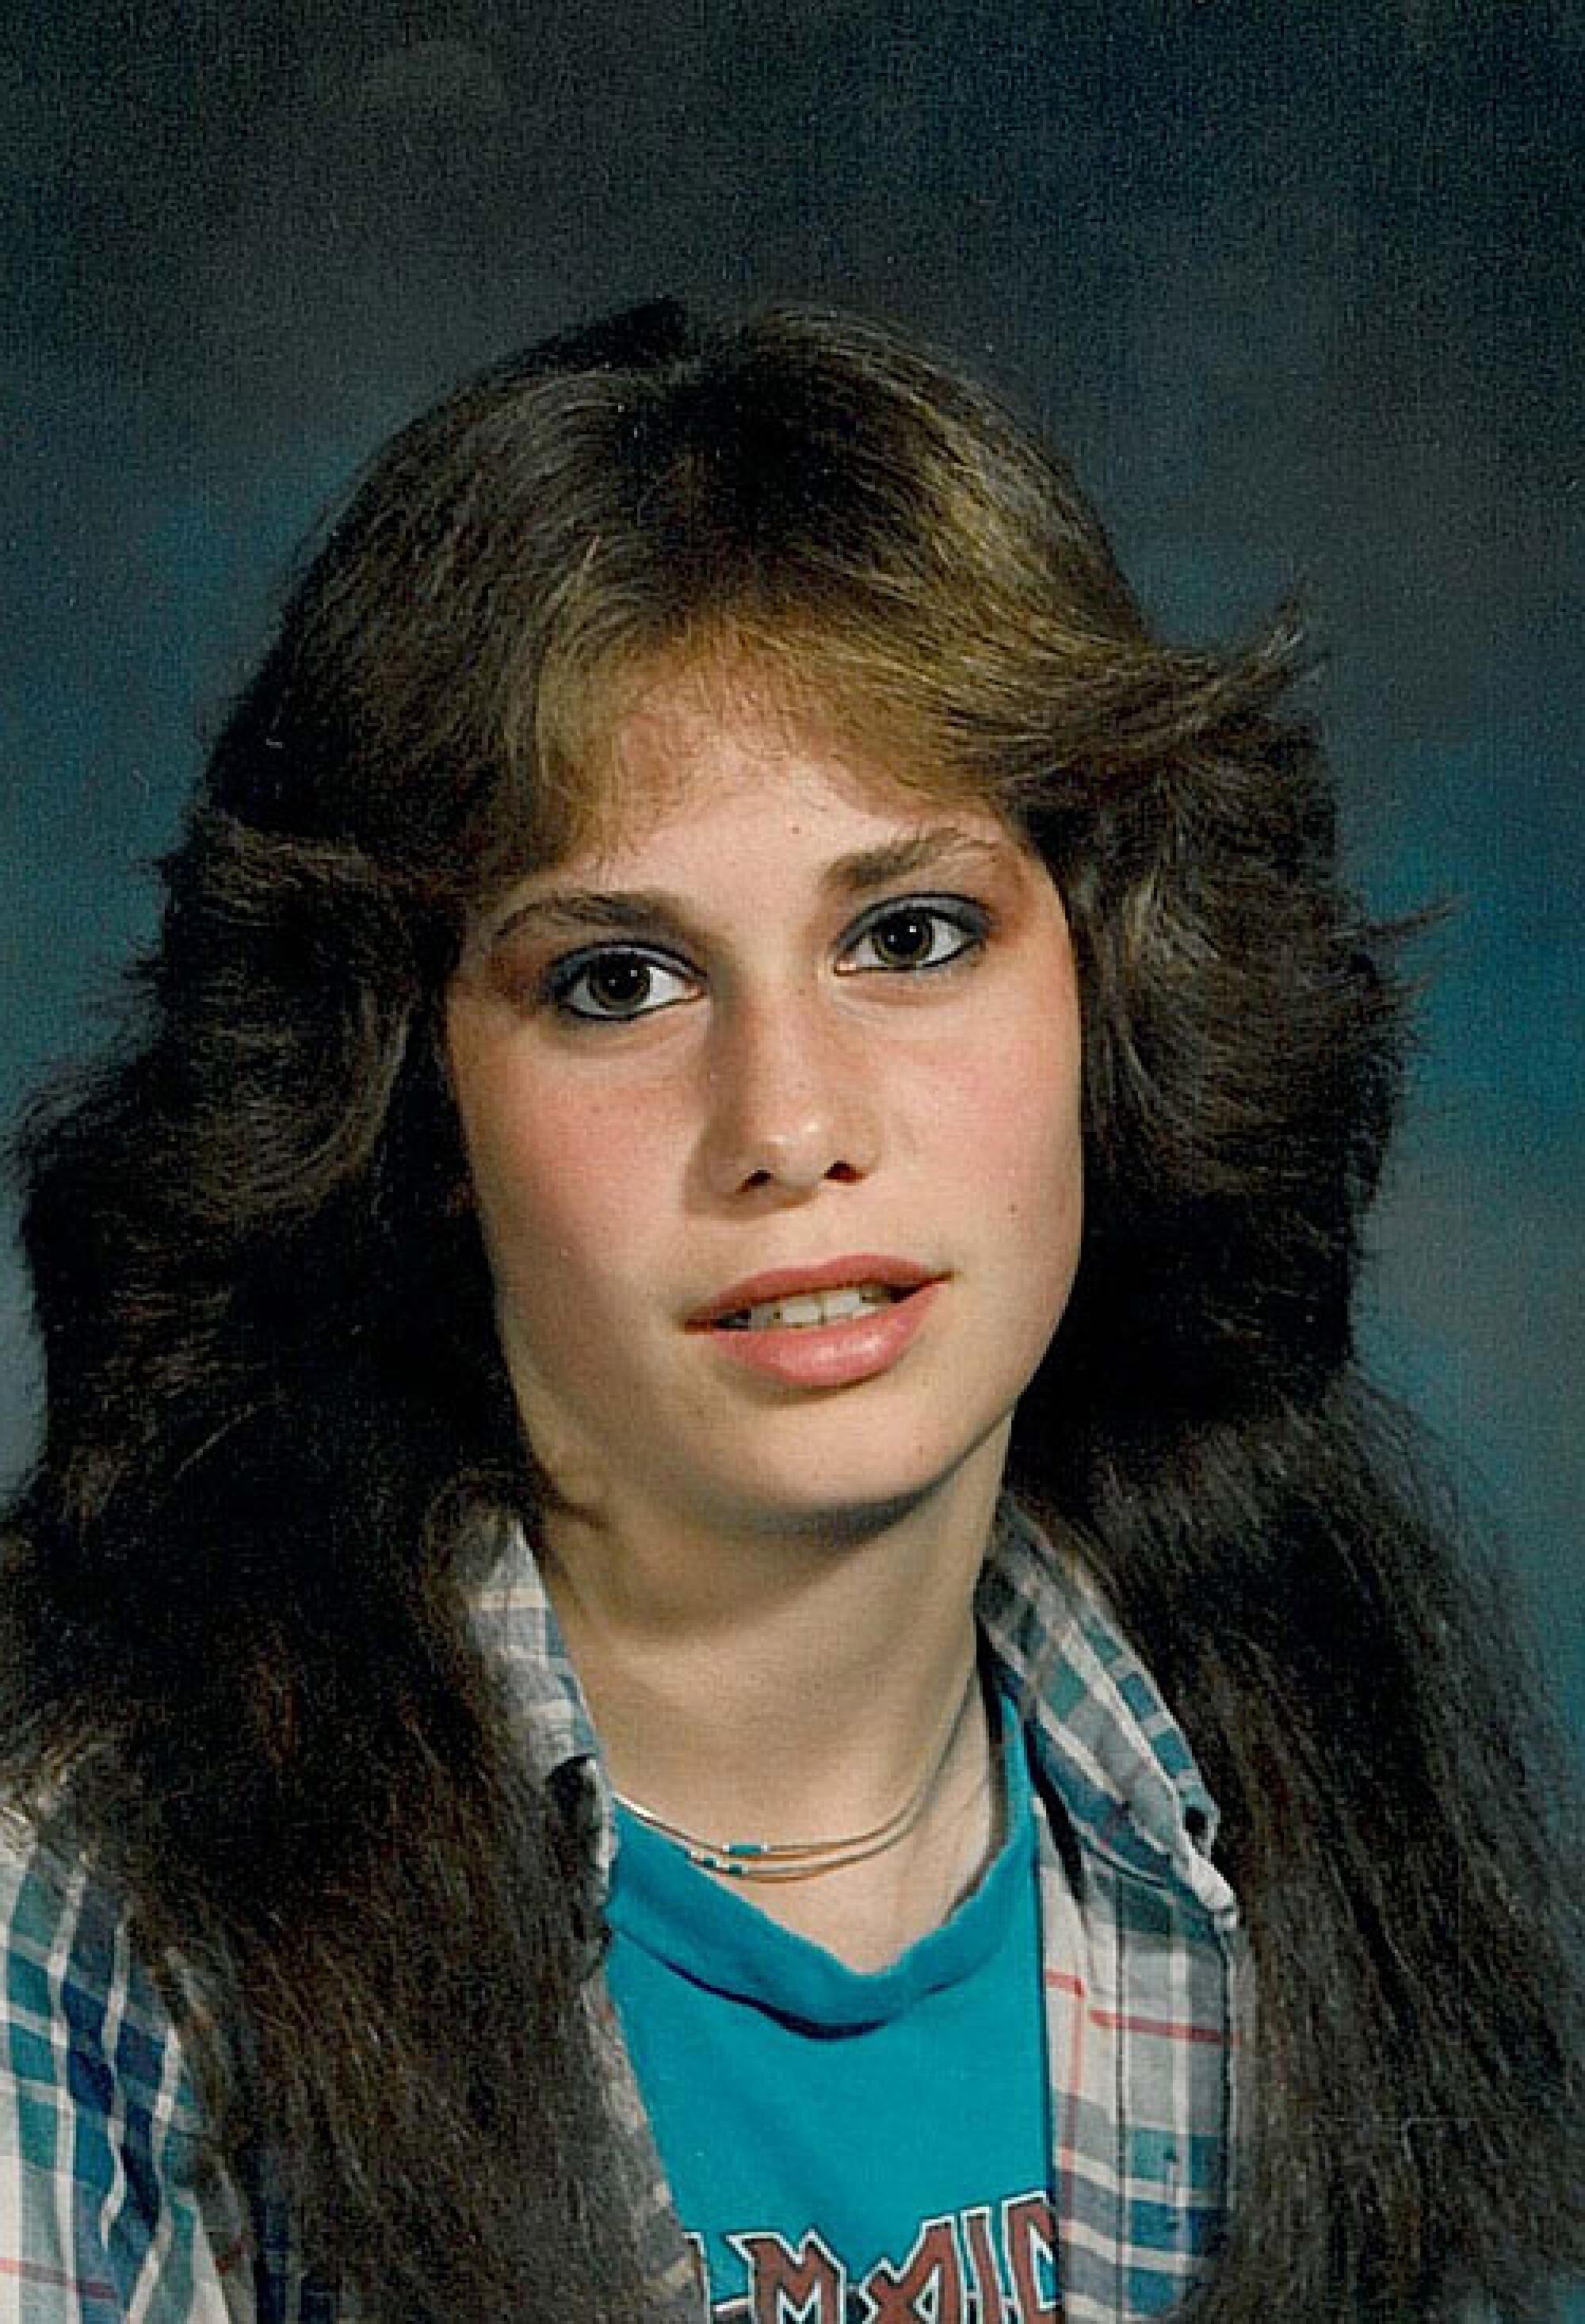 Claire Hough, 14, whose body was found at Torrey Pines State Beach in 1984.